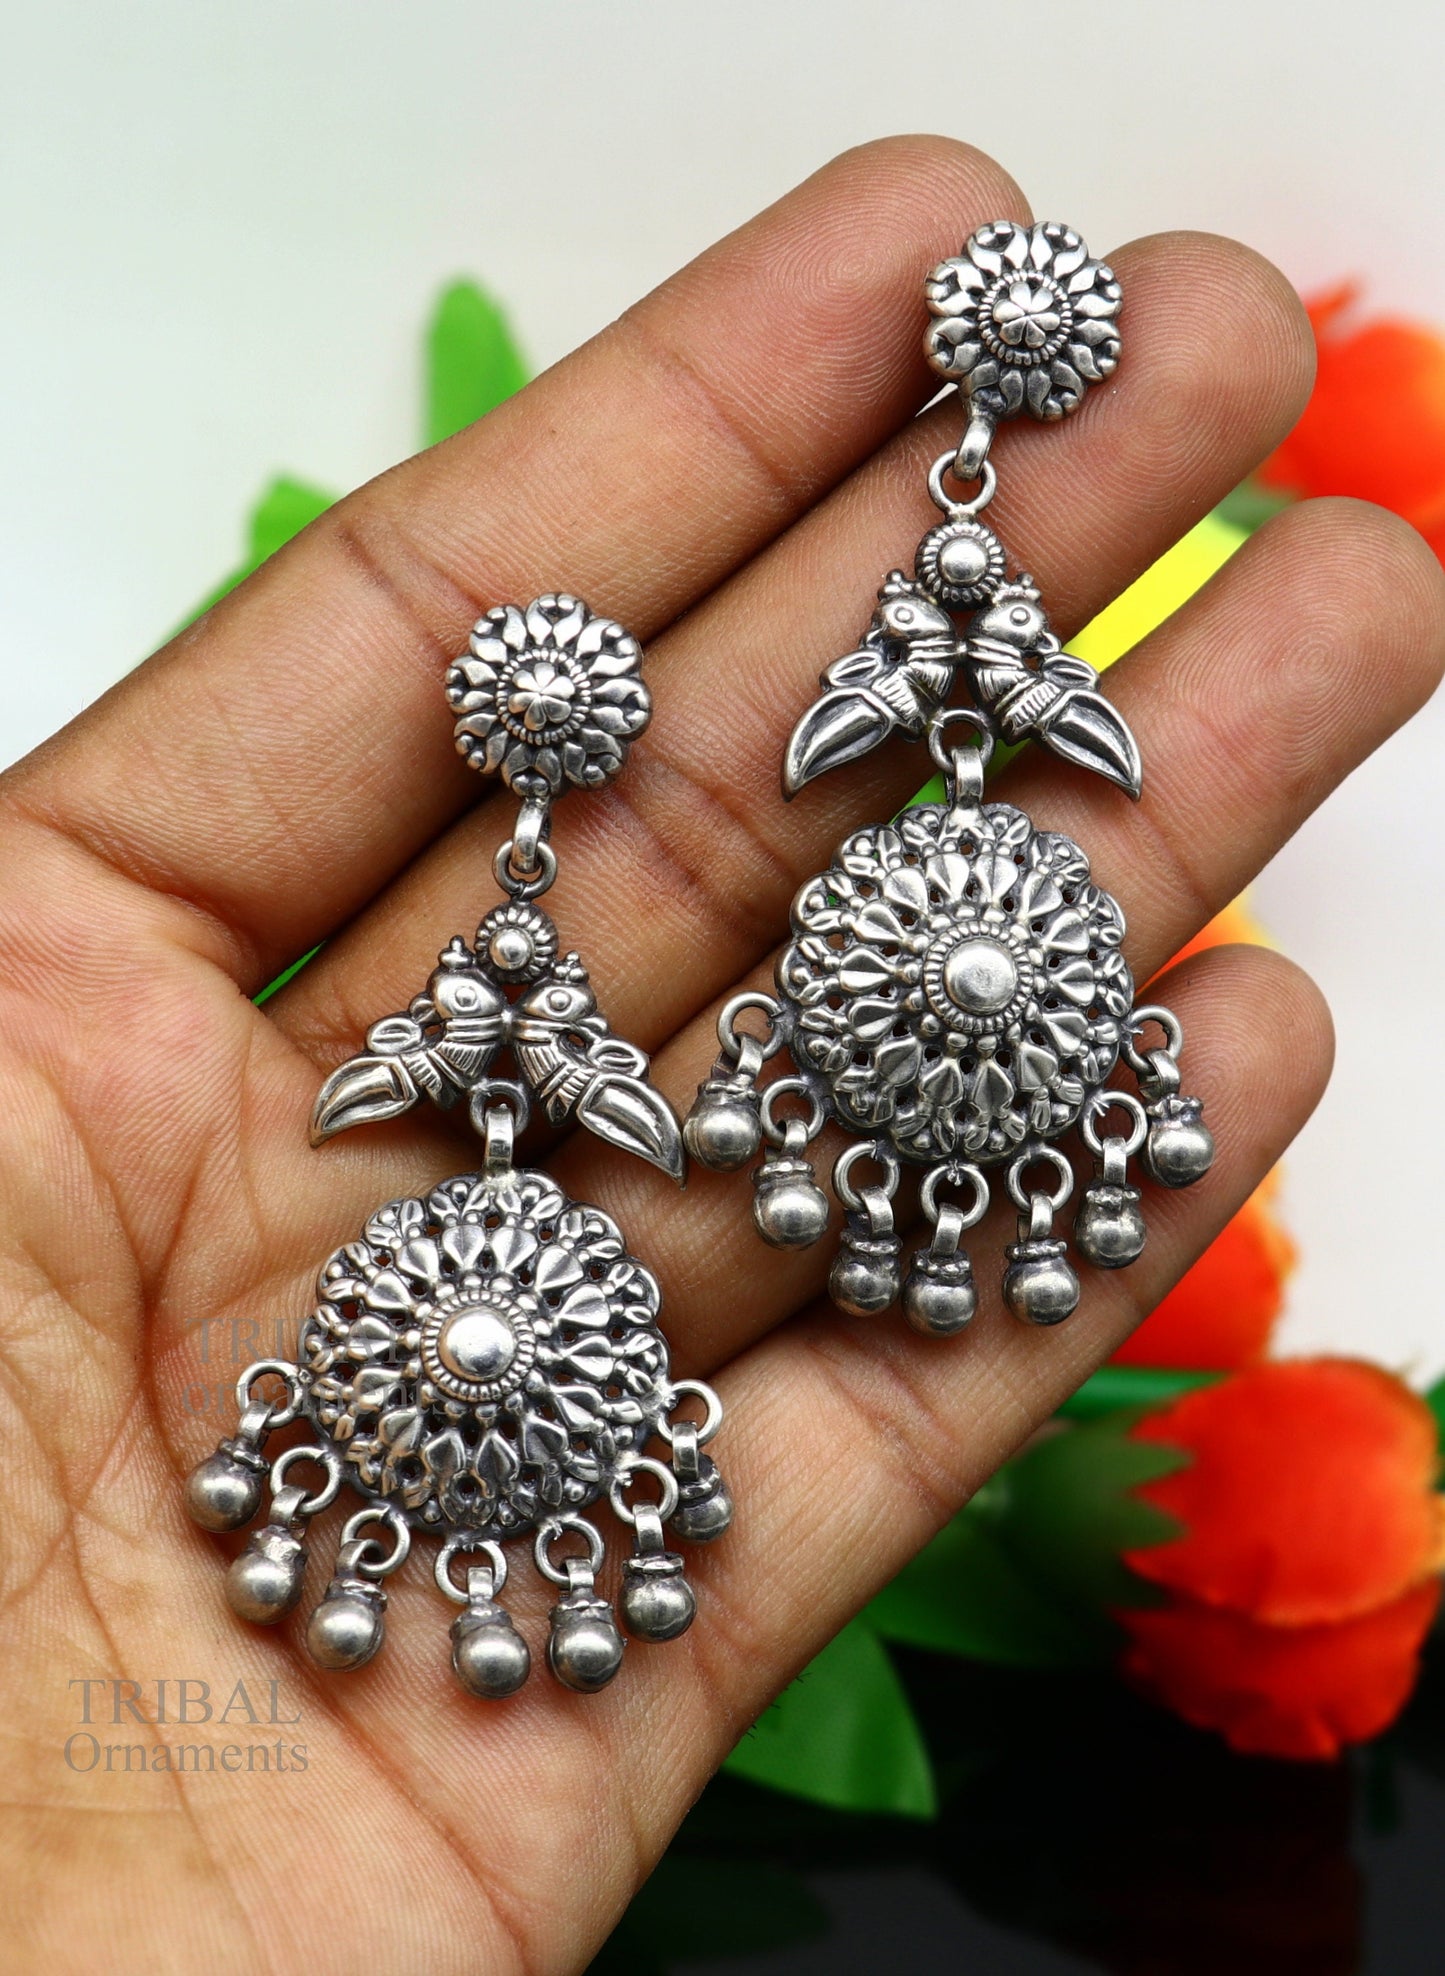 Handmade 925 sterling silver trendy oxidized silver tribal stud Earring, excellent hanging bells party belly dance tribal jewelry ear1106 - TRIBAL ORNAMENTS